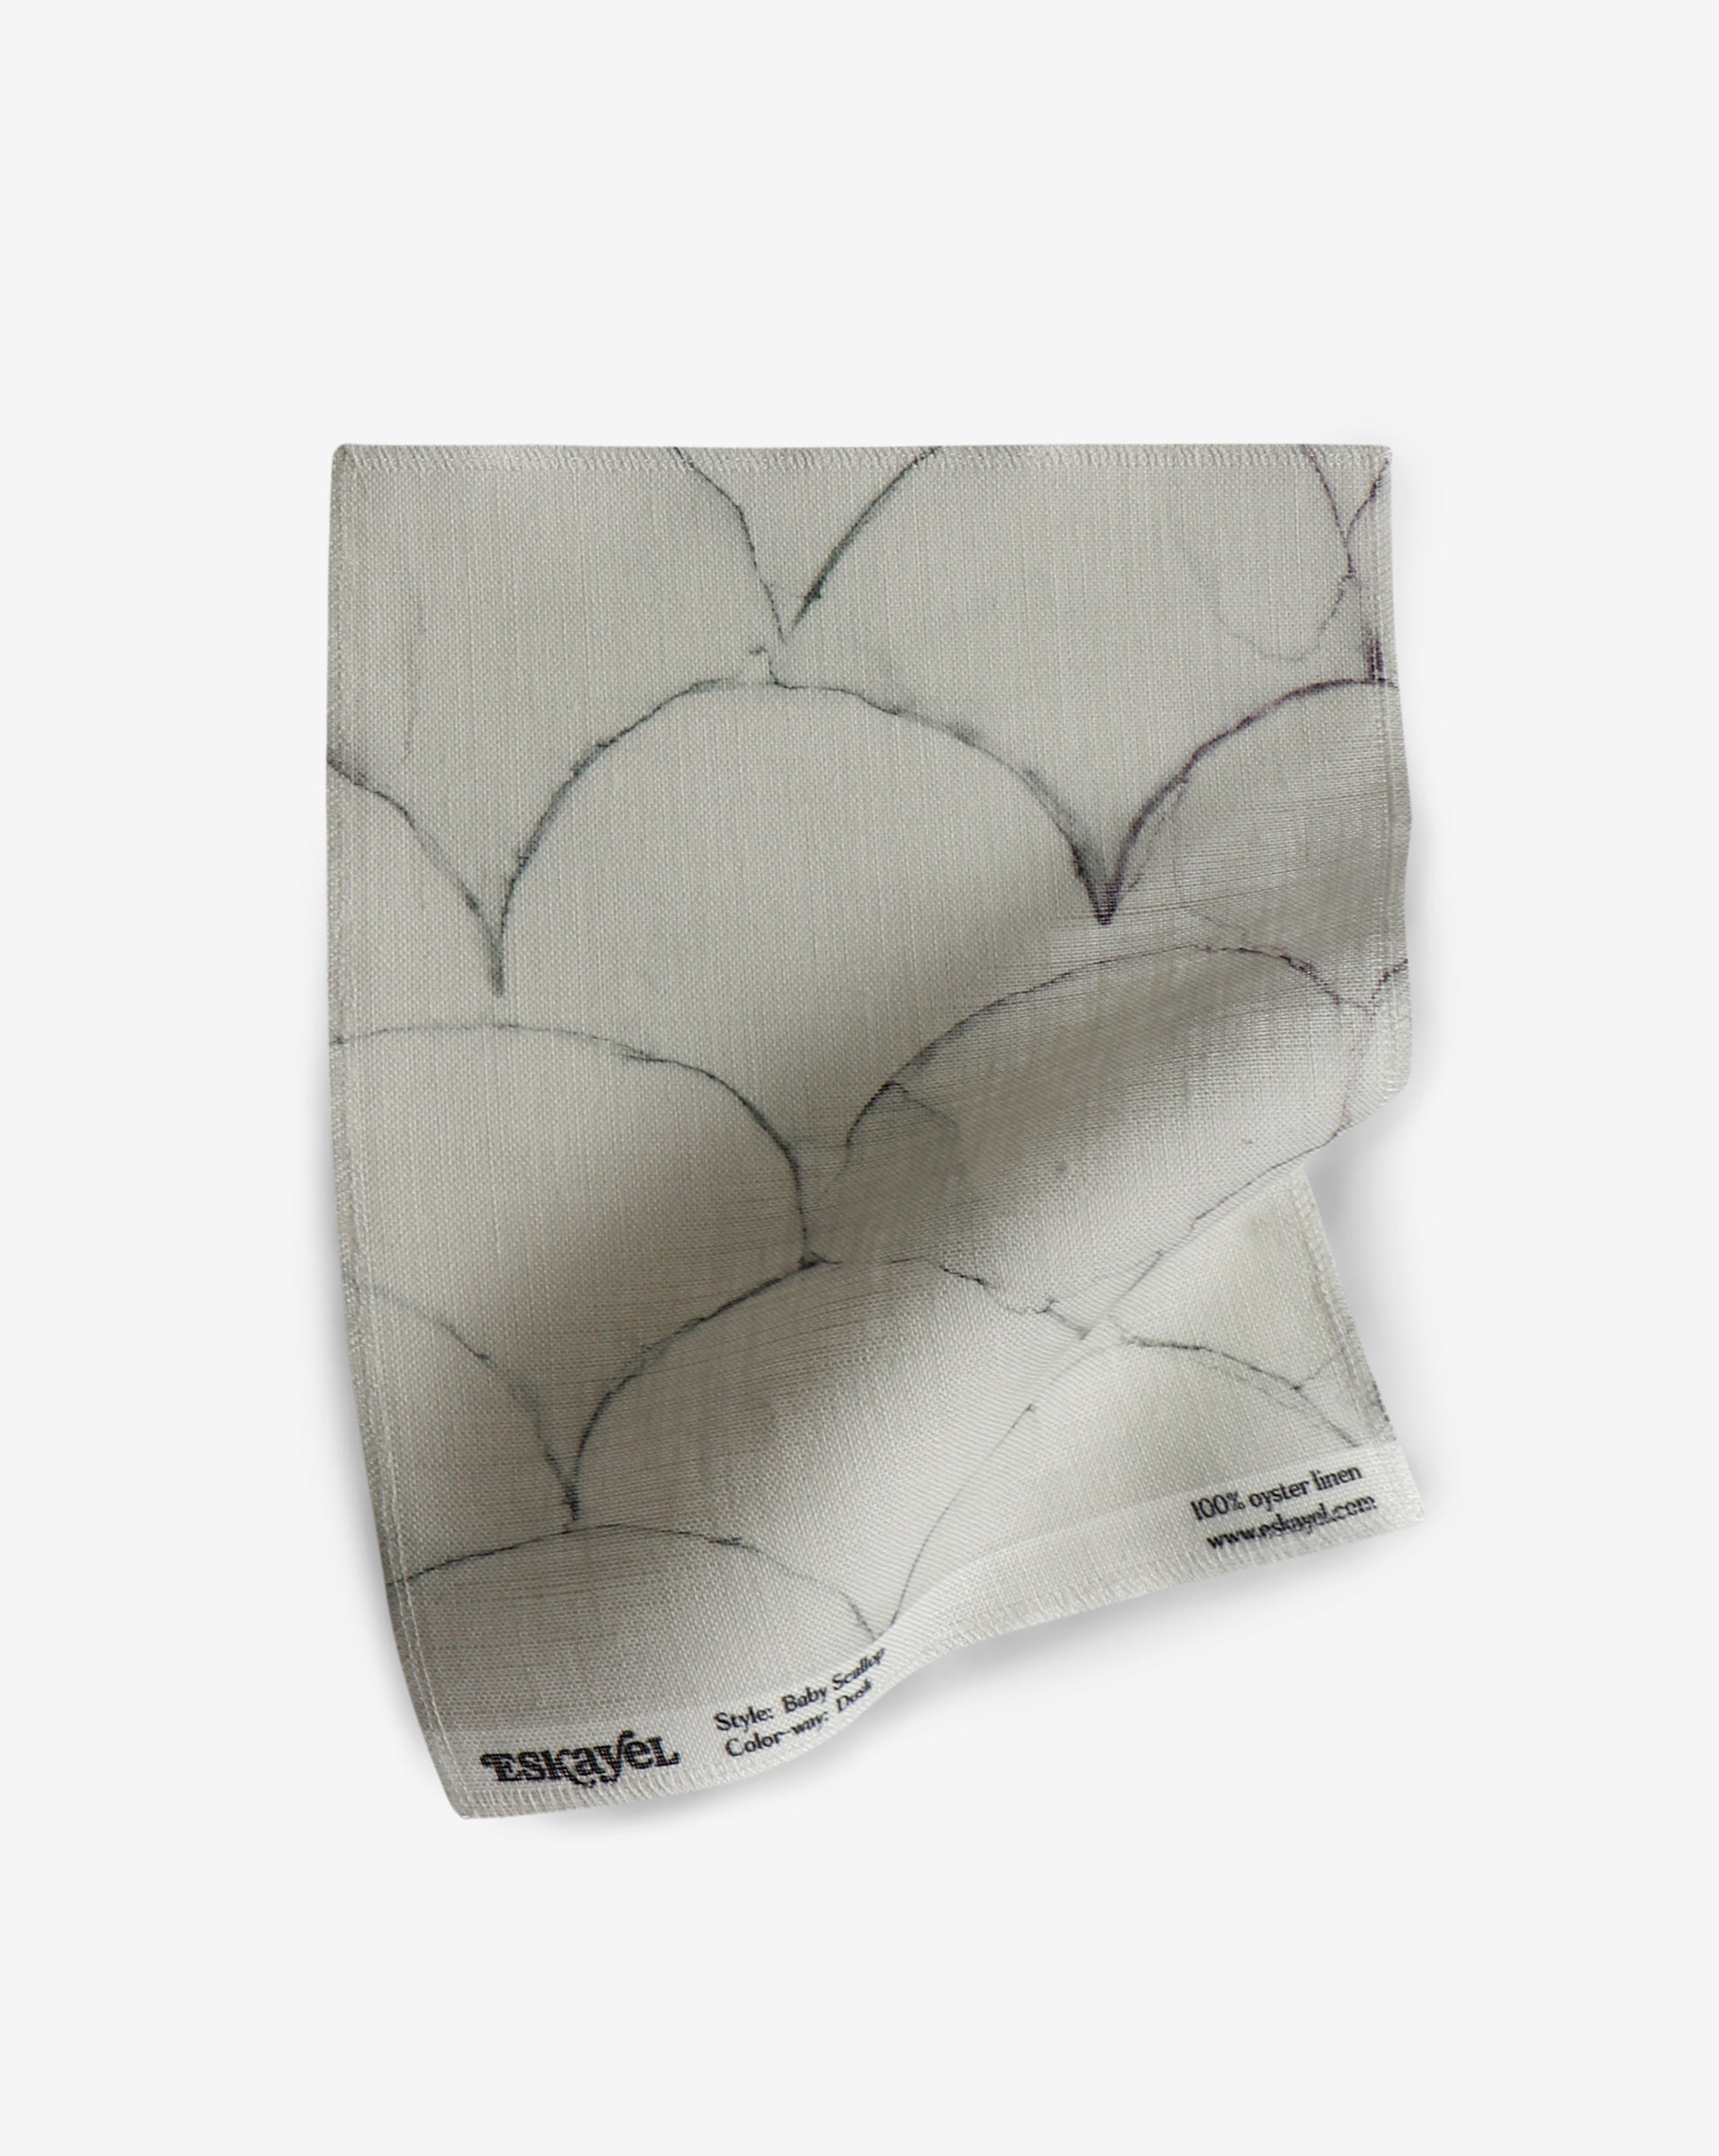 A white Baby Scallop Fabric Dusk fabric with a black and white geometric motif